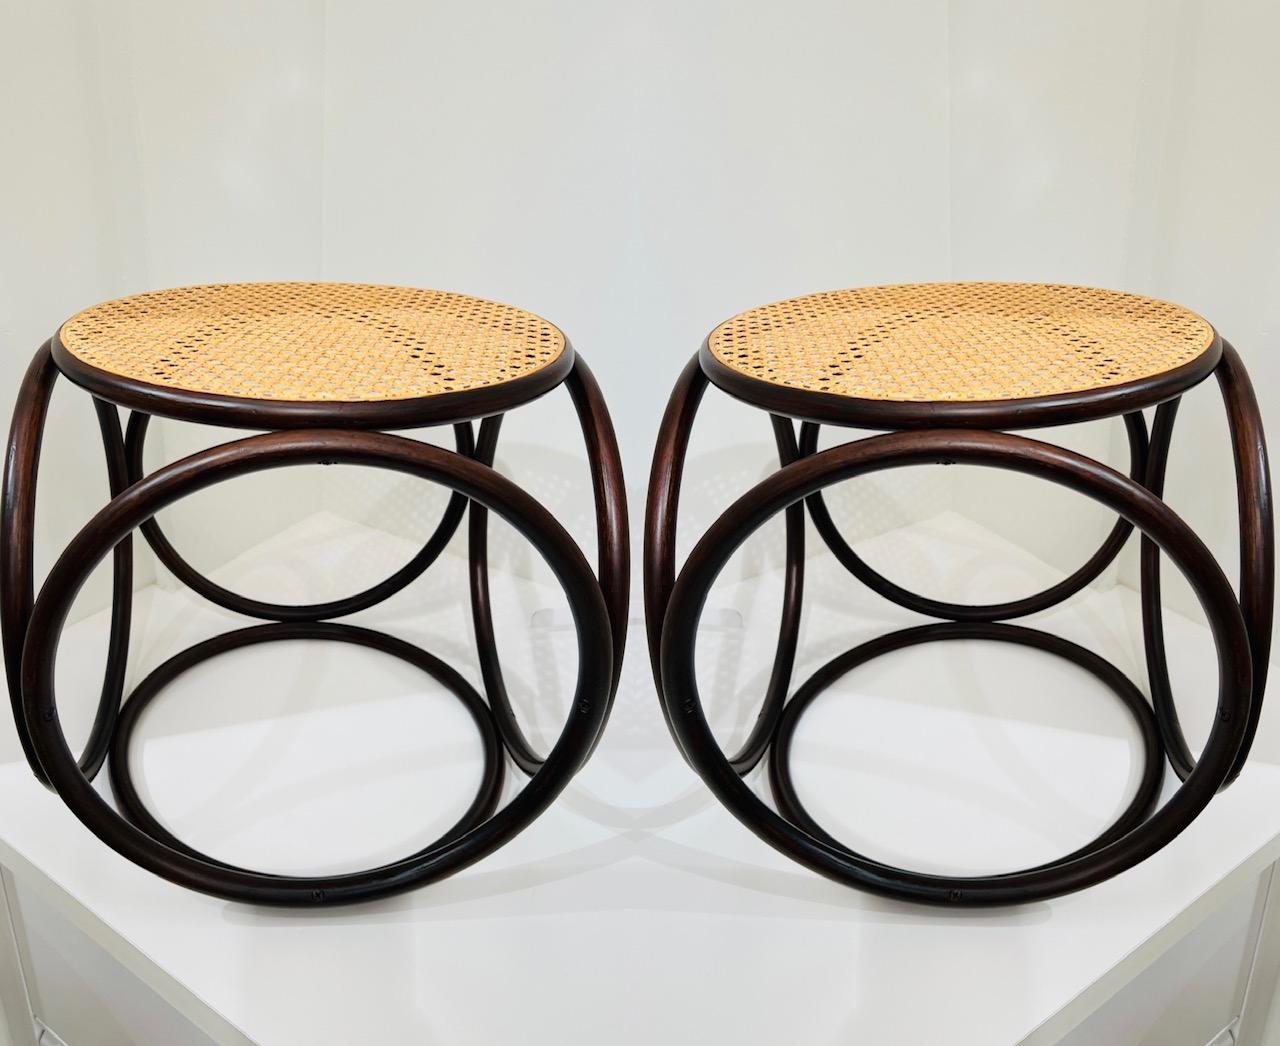 Pair of 1960s minimalist side tables in bentwood and cane. Comprised of six circular bentwood components creating a striking geometric design with the illusion of movement. Fitted with handwoven cane top and newly refinished in dark walnut. These